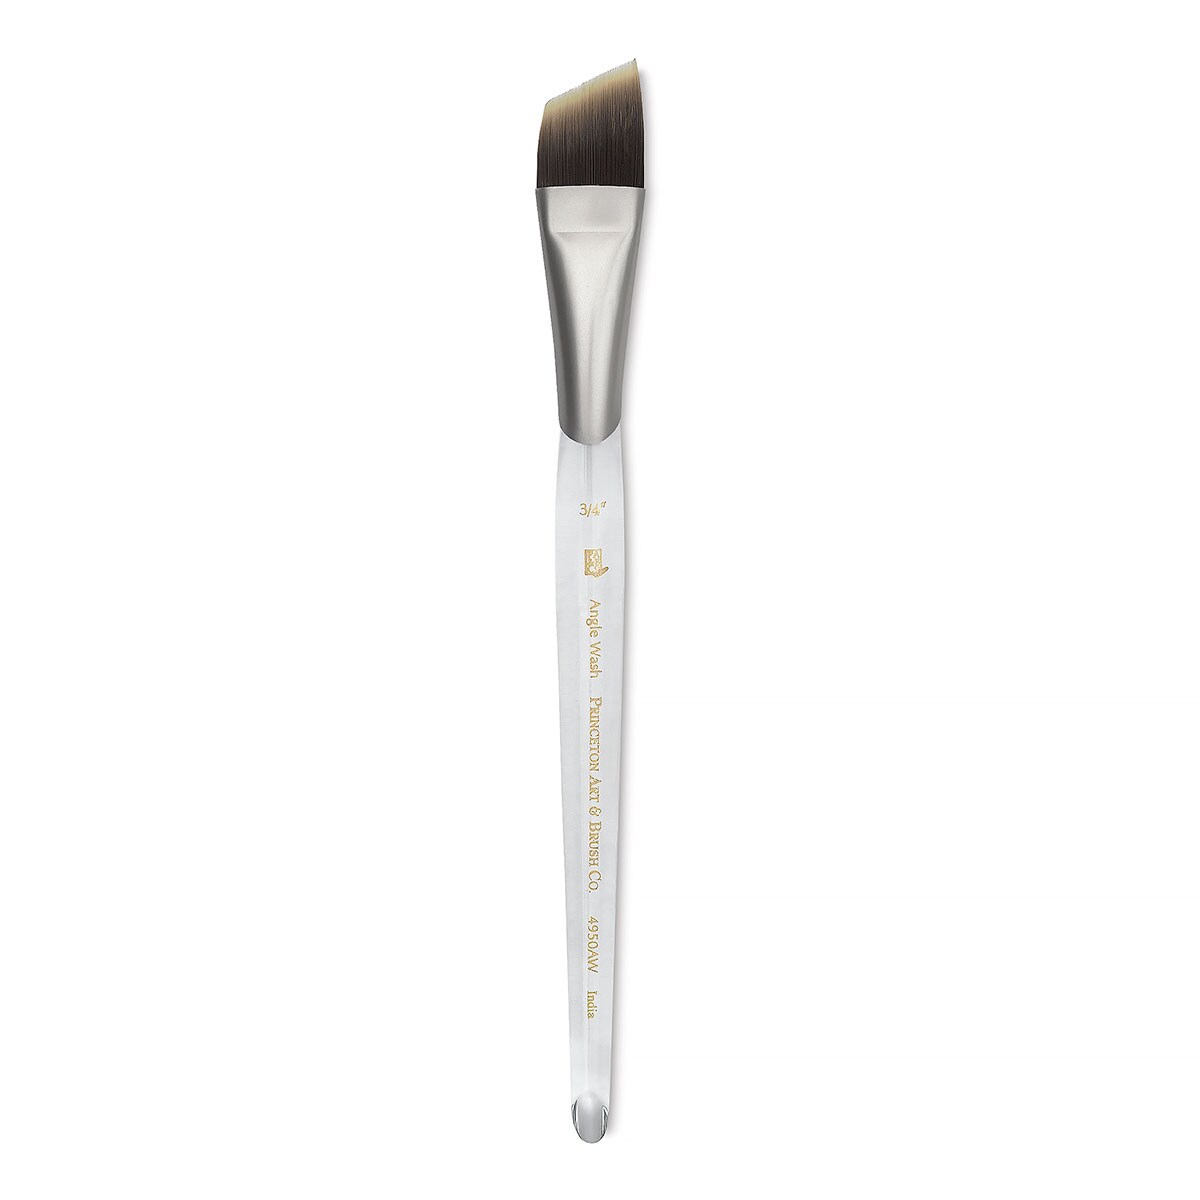 Princeton Synthetic Clear Handle Brush - Angle Wash, Short Handle, Size 3/4&#x22;